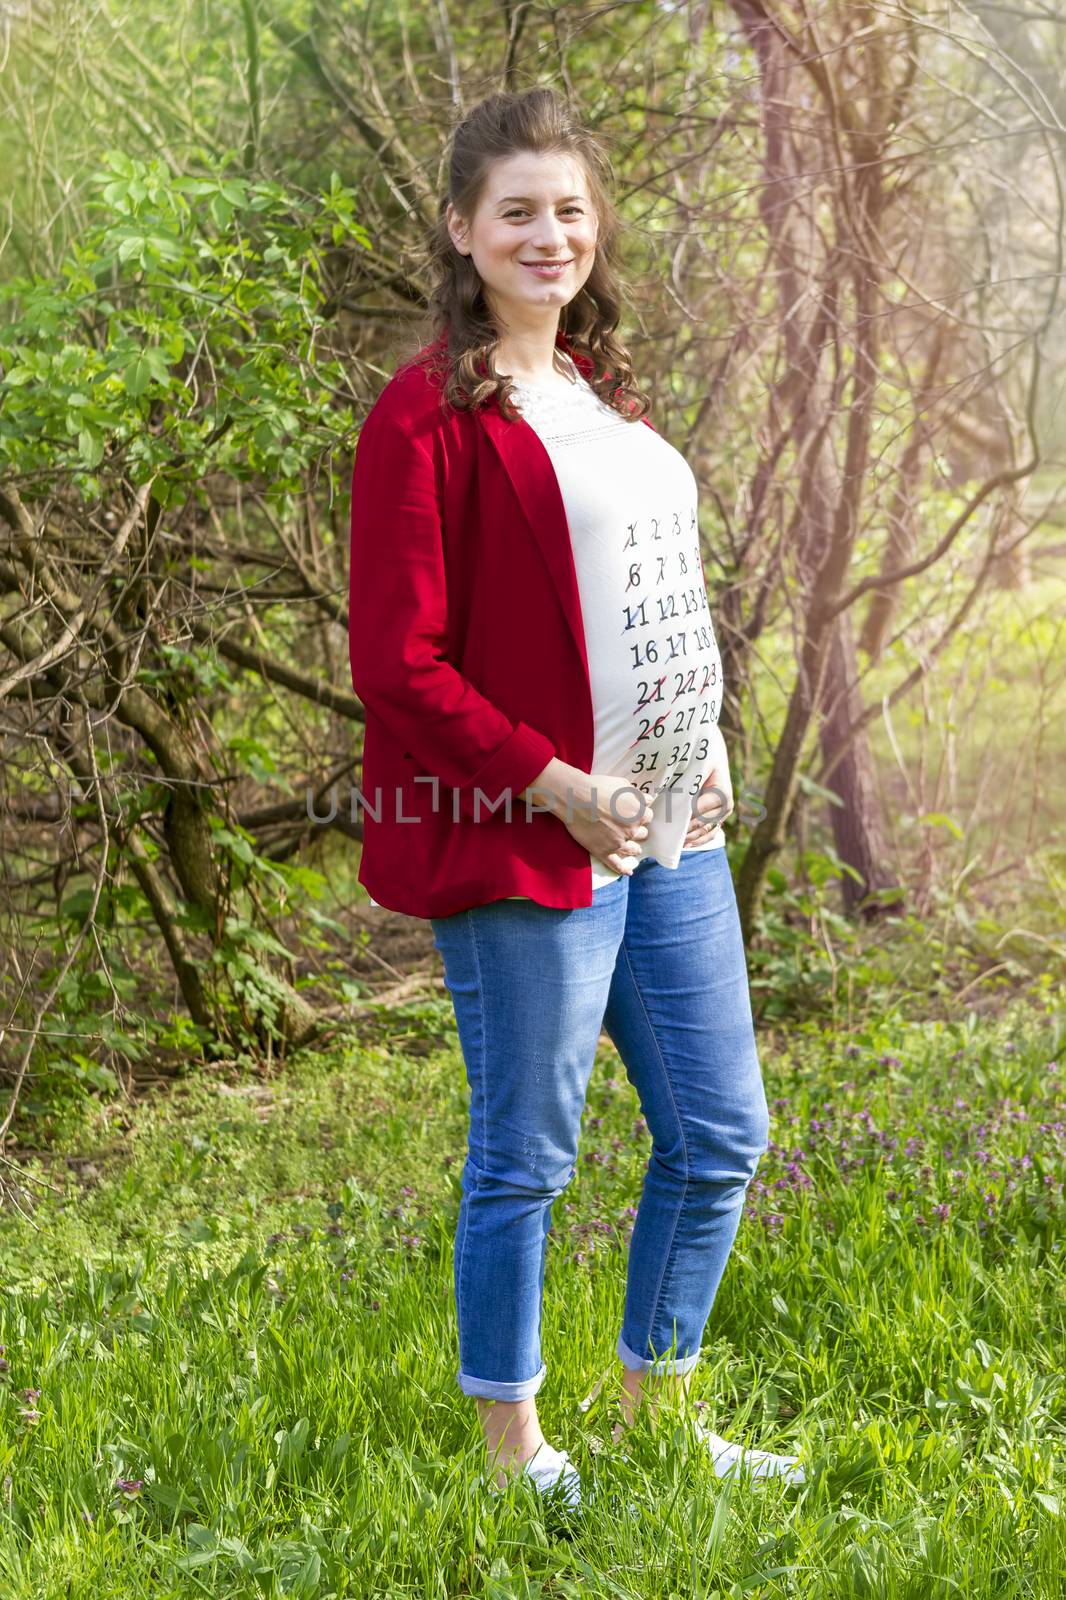 Pregnant woman in red jacket with calendar on her T-shirt  by manaemedia